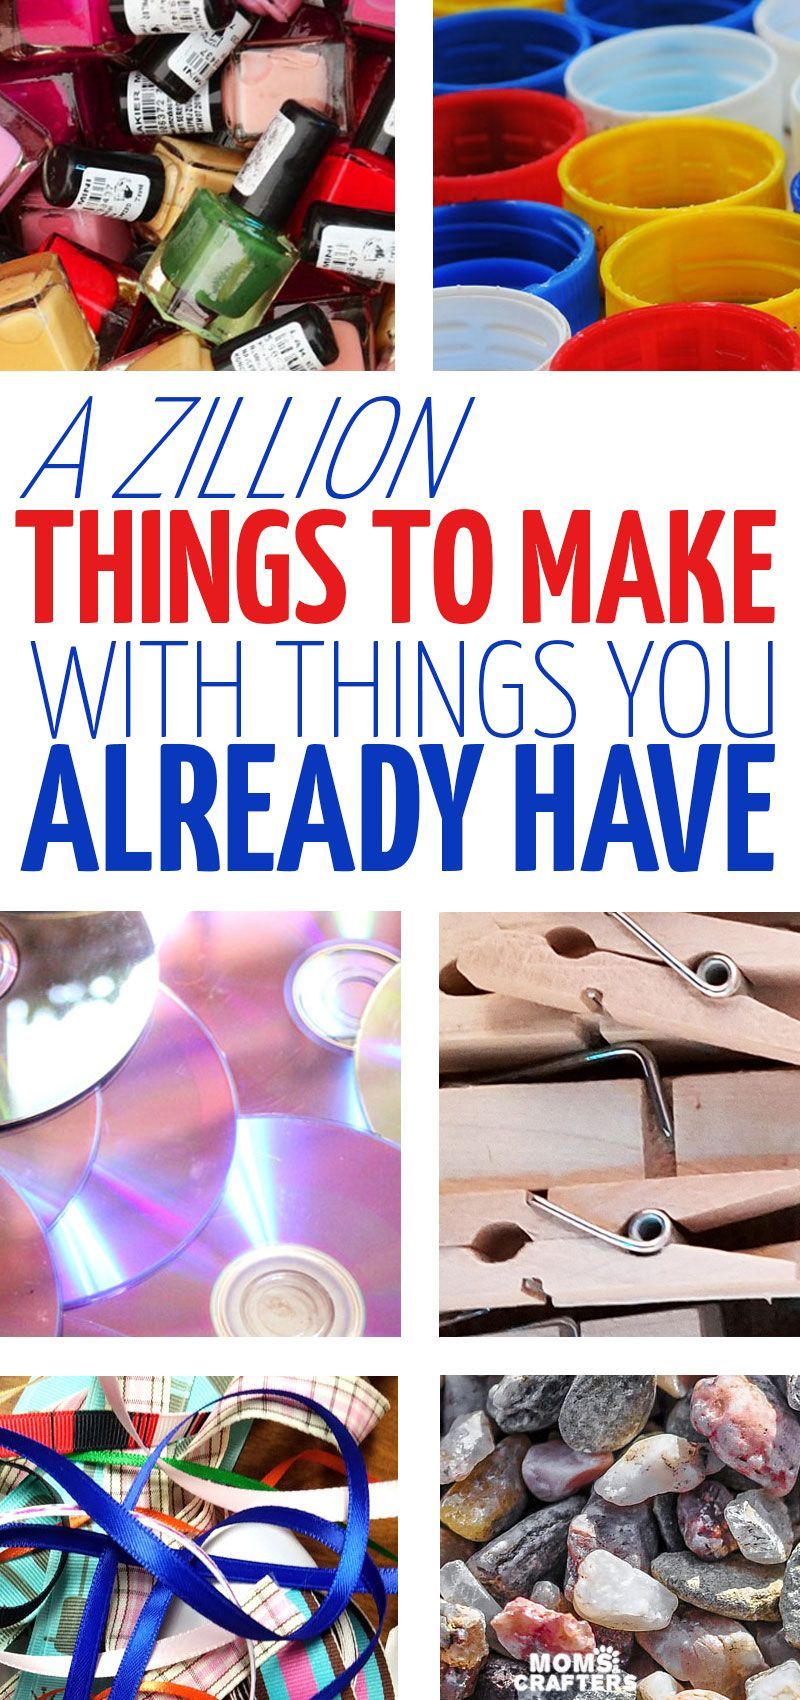 A Zillion things to make - A Zillion things to make -   15 cool diy Projects ideas